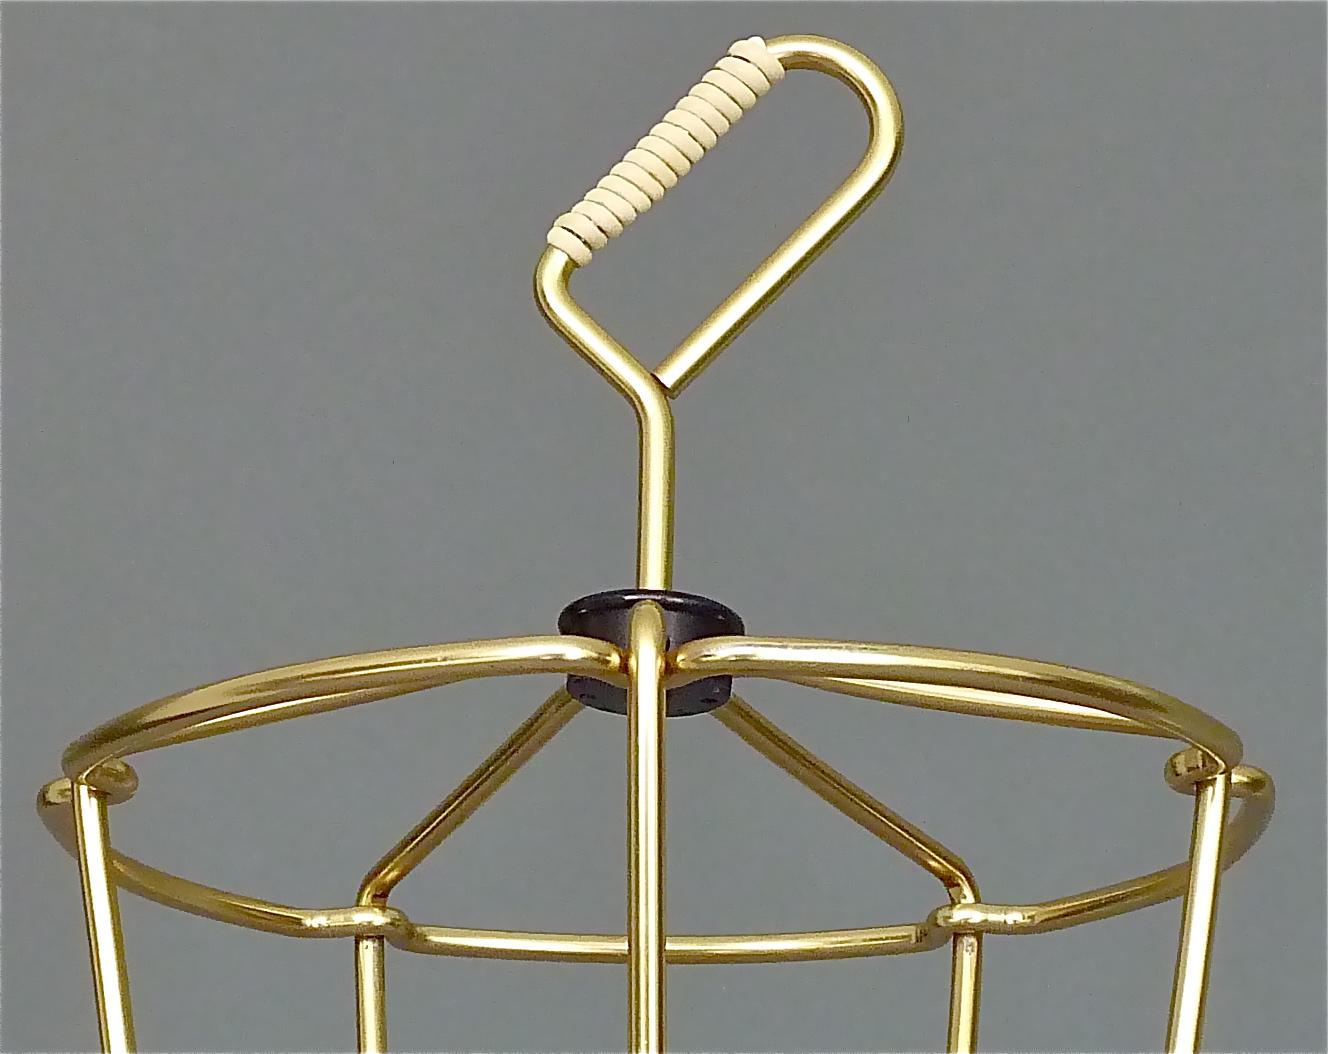 Anodized Midcentury Tripod Sputnik Umbrella Stand with Handle Golden White Black 1950s For Sale